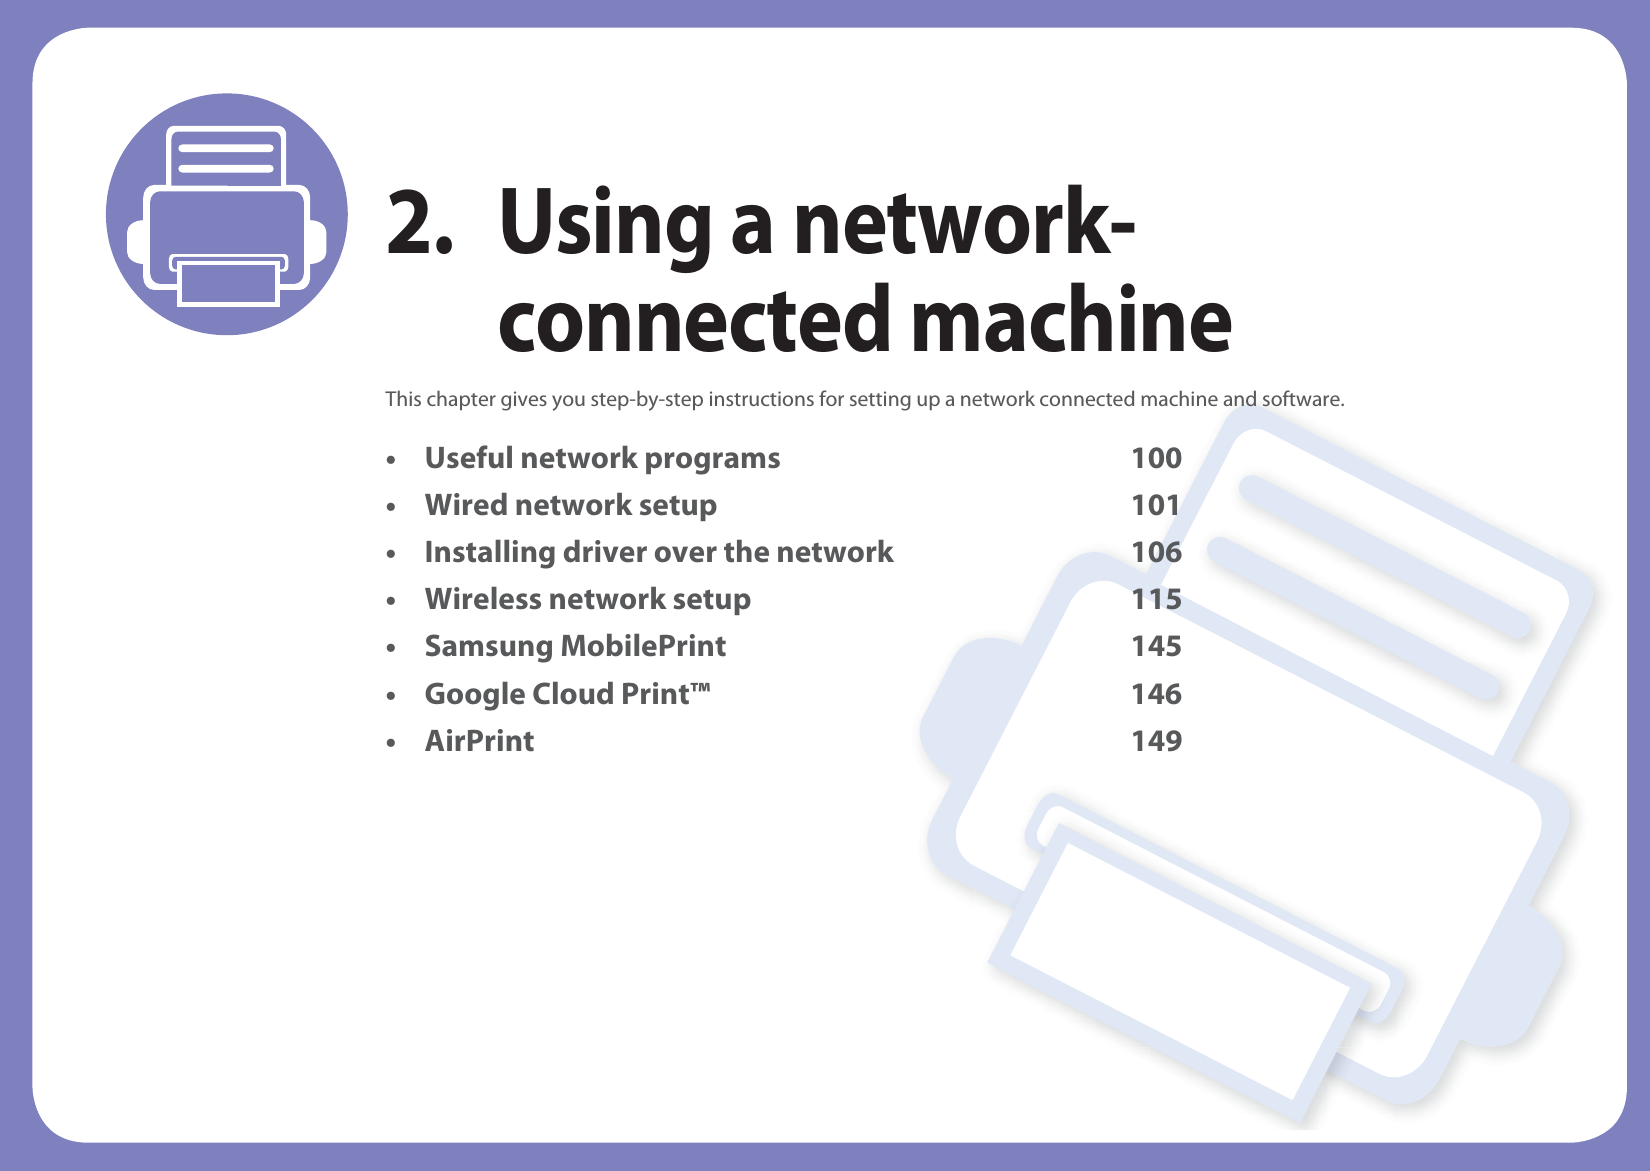 2. Using a network-connected machineThis chapter gives you step-by-step instructions for setting up a network connected machine and software.• Useful network programs 100• Wired network setup 101• Installing driver over the network 106• Wireless network setup 115• Samsung MobilePrint 145• Google Cloud Print™ 146• AirPrint 149